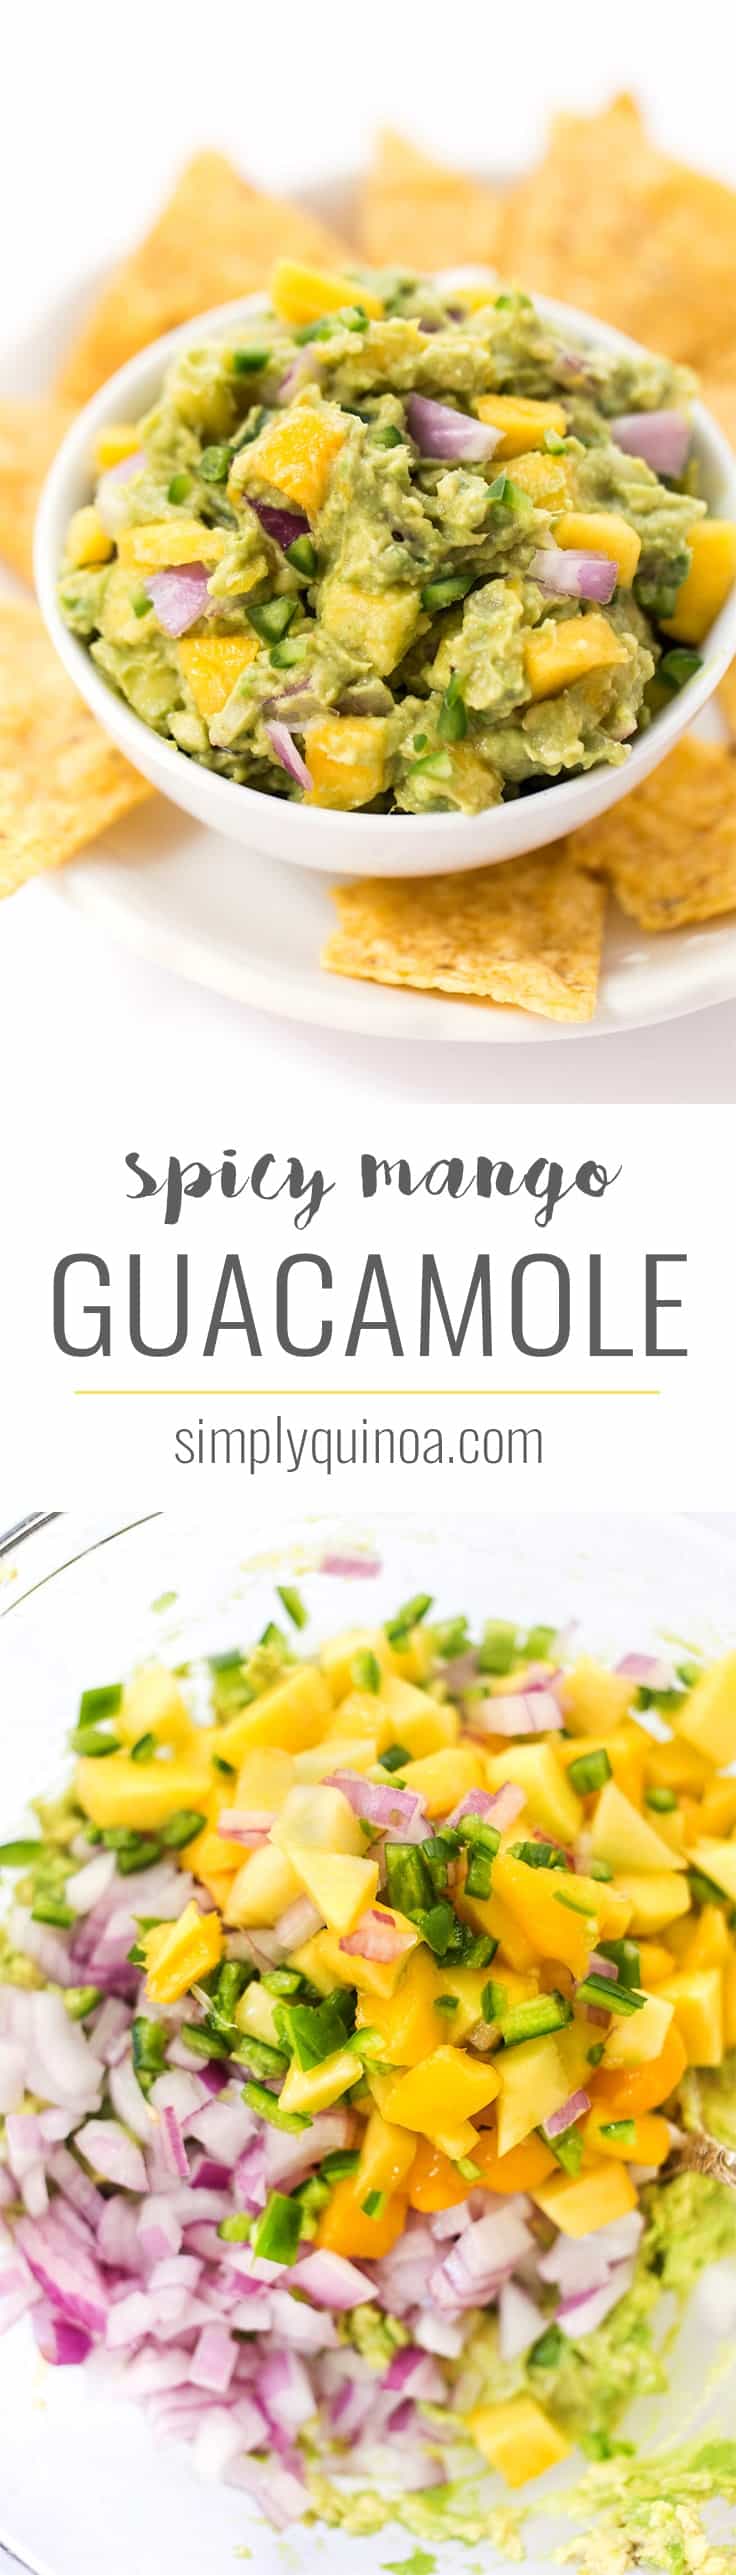 SPICY MANGO GUACAMOLE -- this recipe is a quick and easy spread that goes with everything. Use it on top of burgers, dip with chips or spread it on some toast!